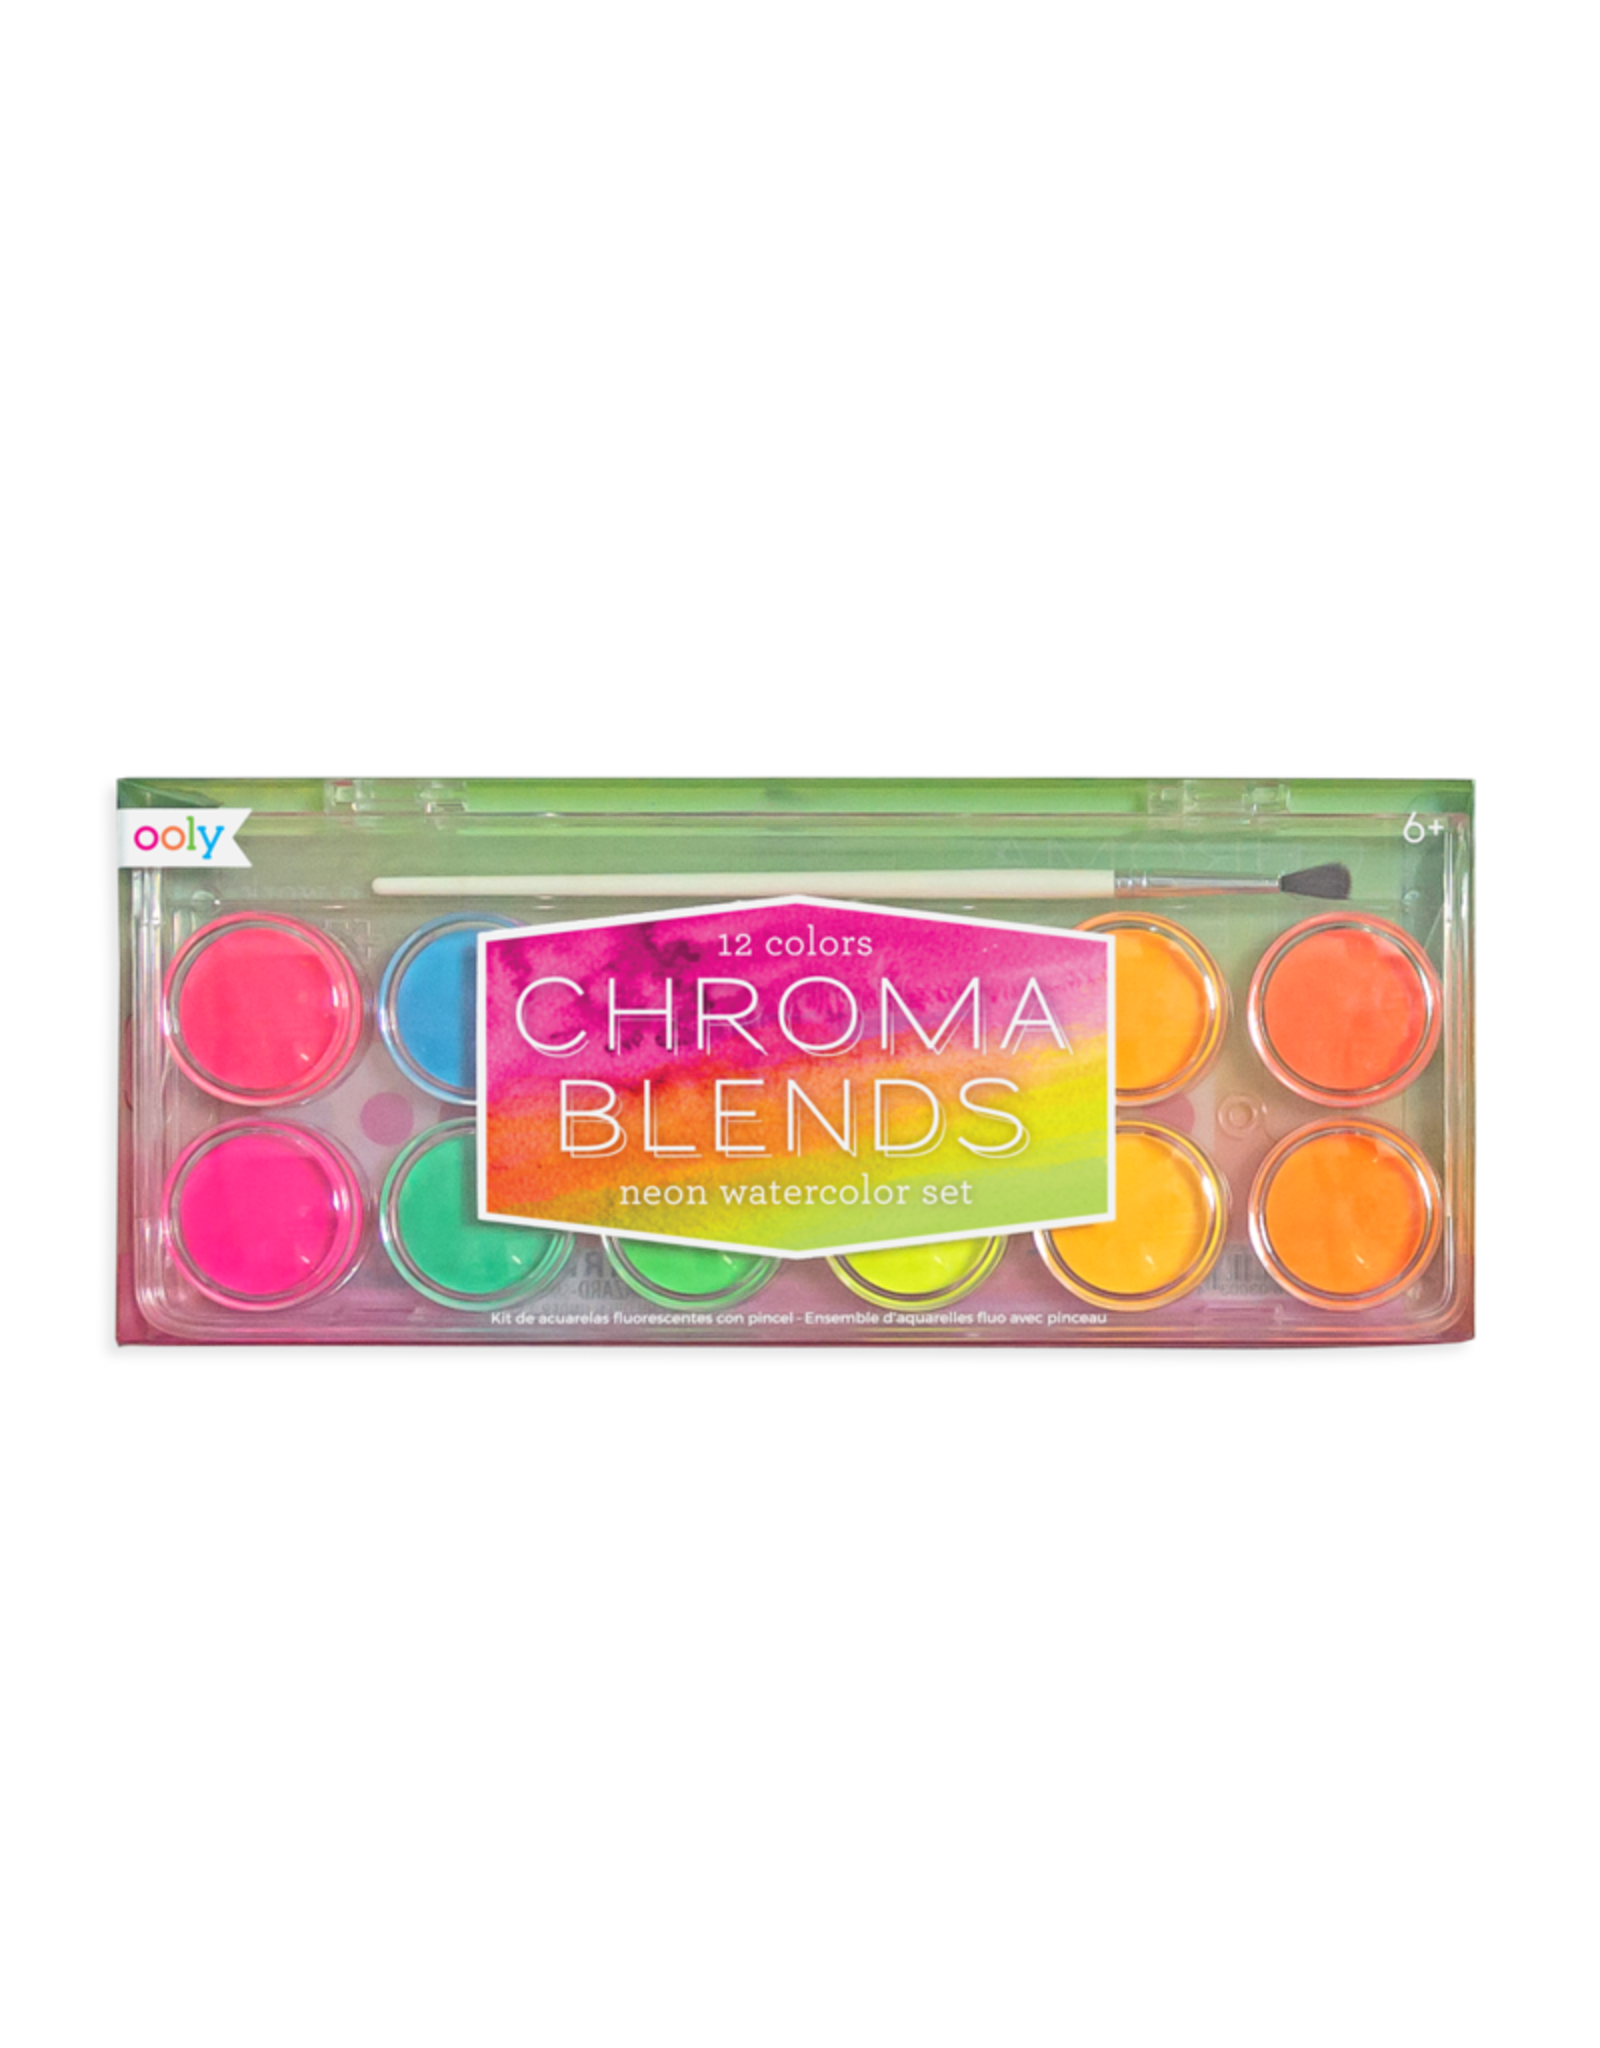 Ooly Chroma Blends Neon Watercolor Set